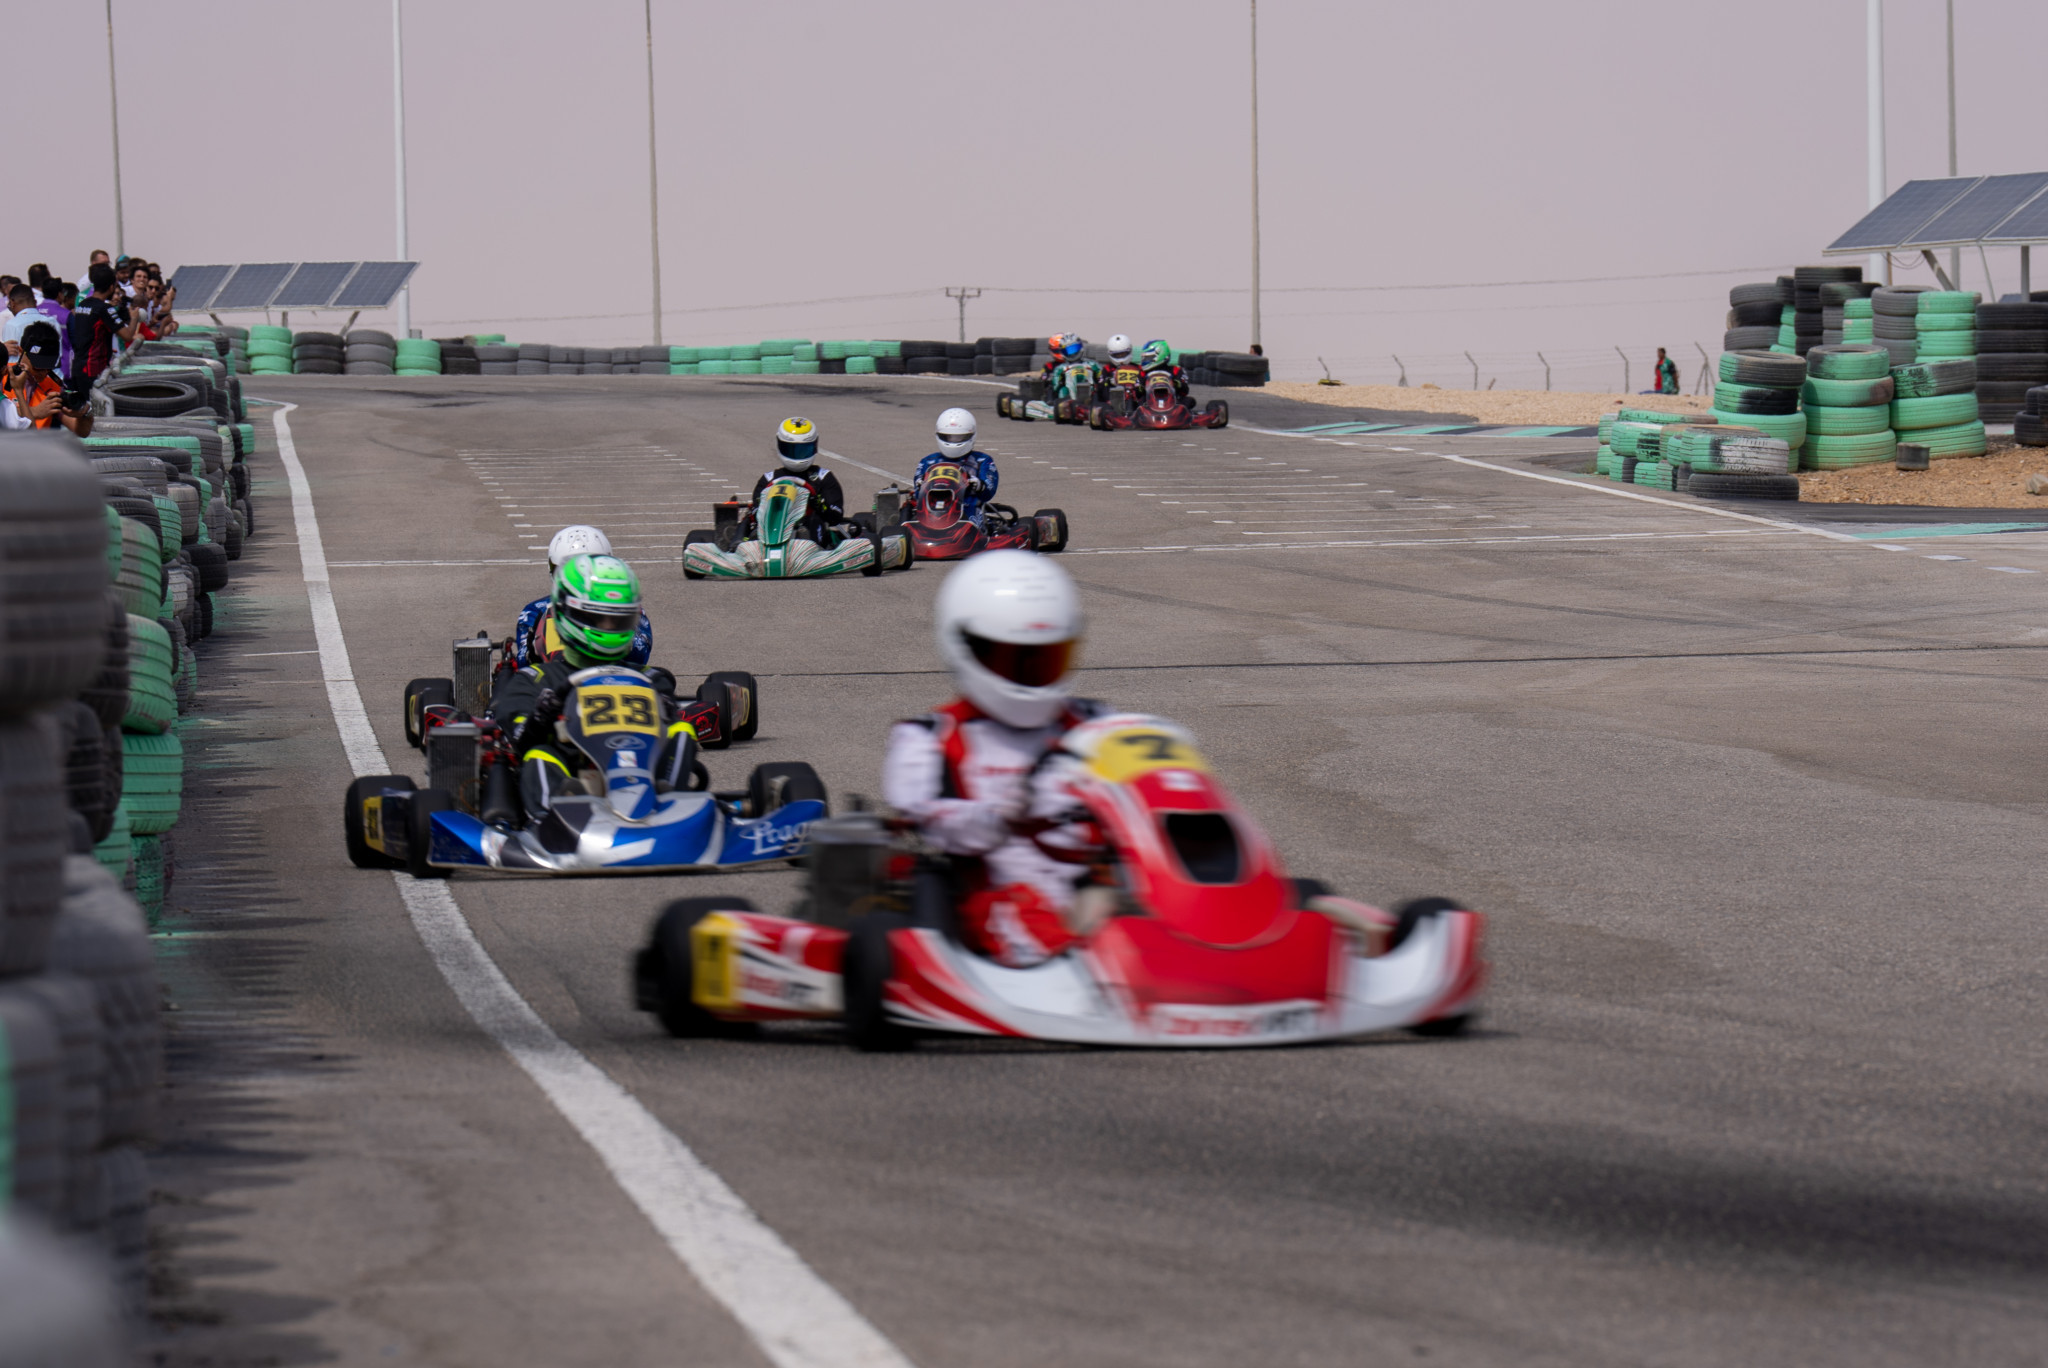 Karting drivers took to the track to win gold ©Saudi Games